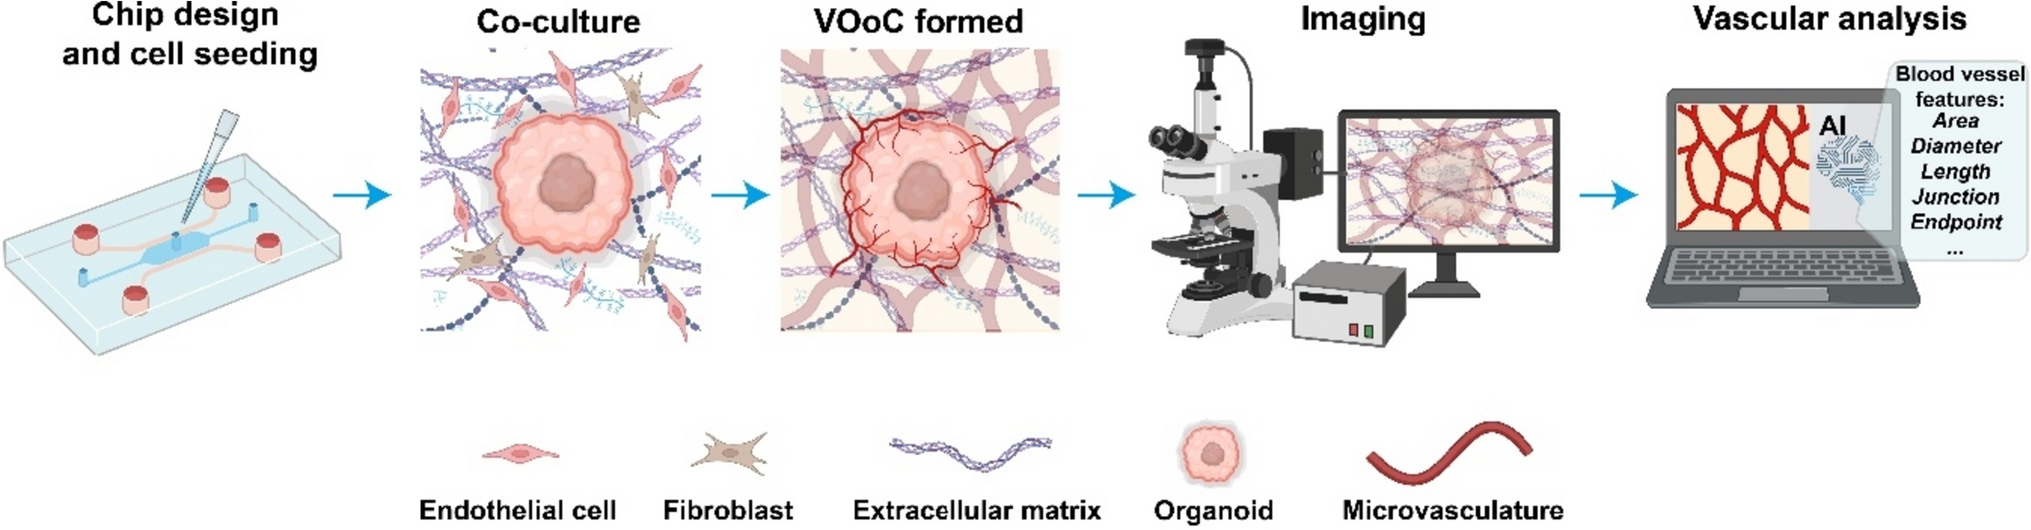 Vascularized organoid-on-a-chip: design, imaging, and analysis